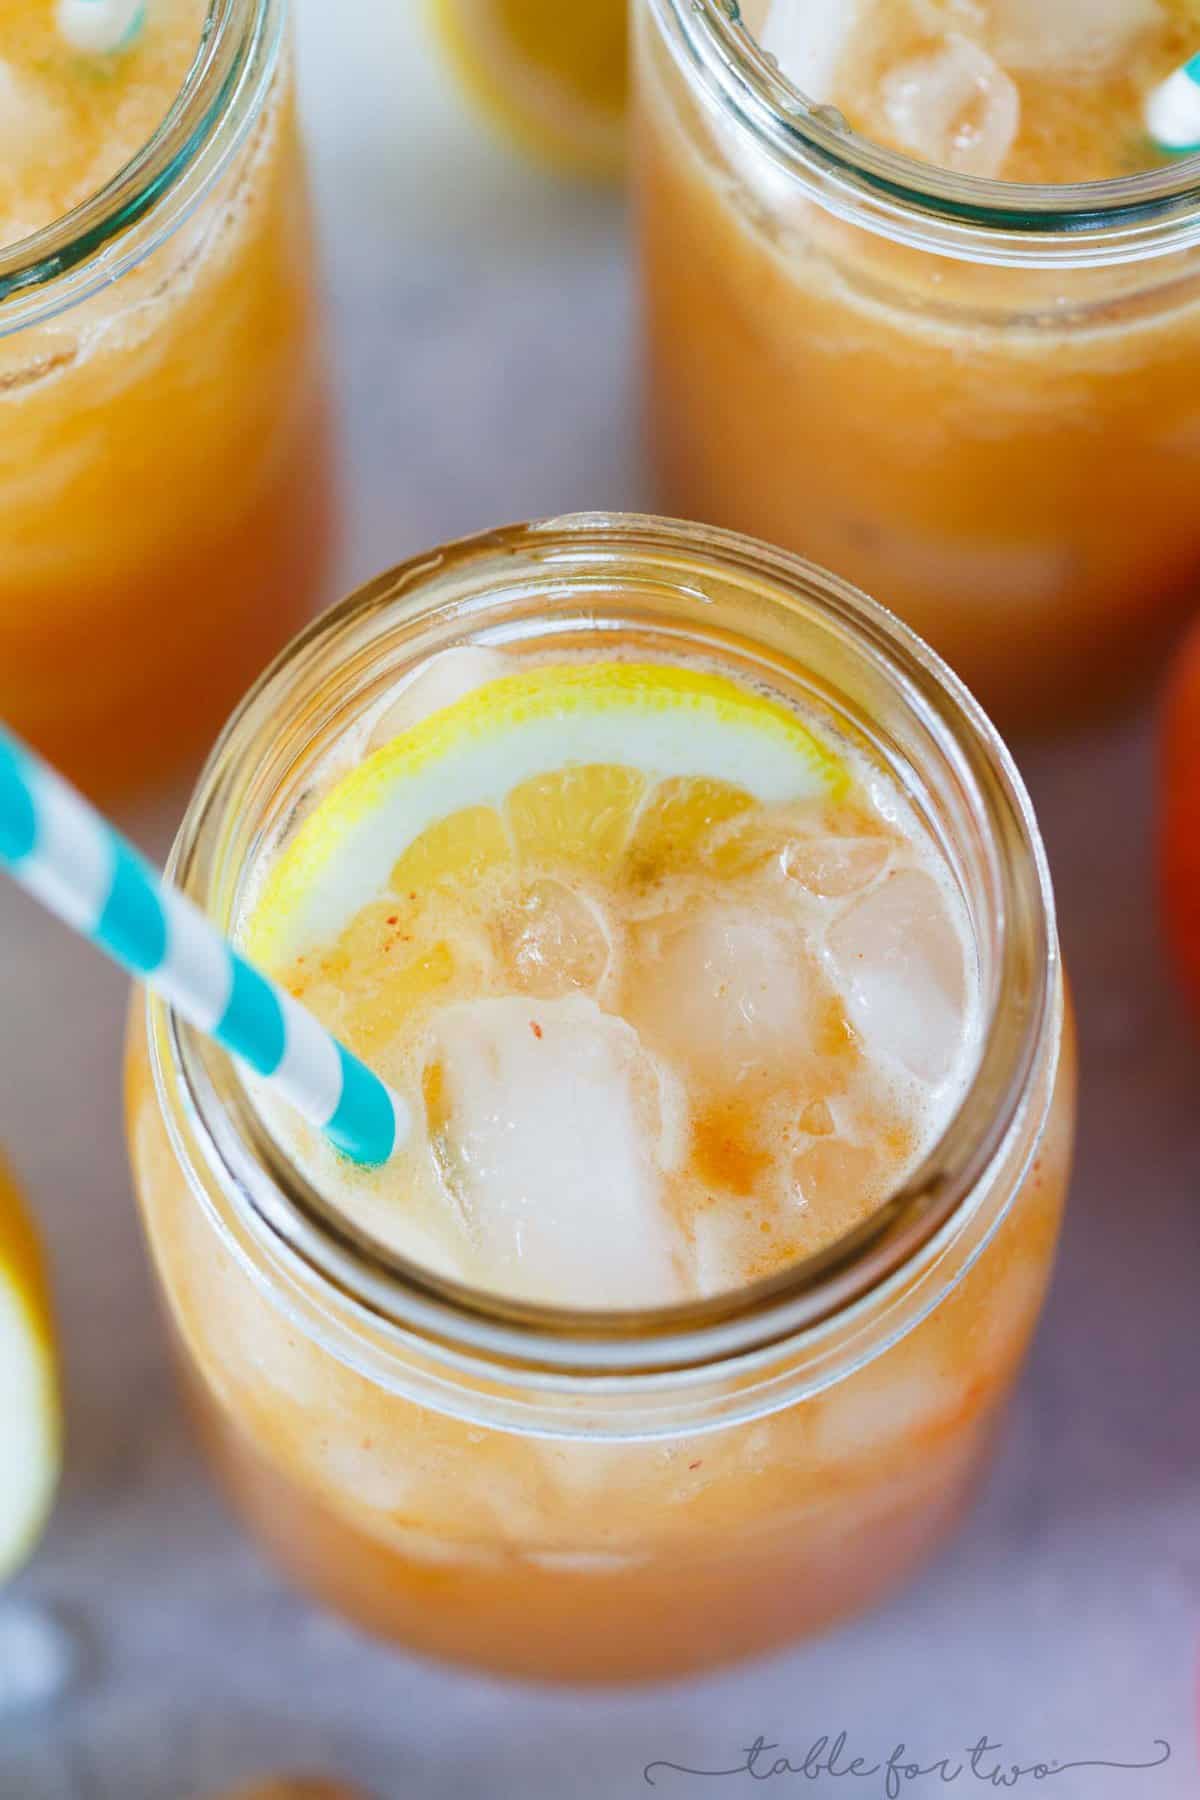 This lemon ginger peach spritzer is so fresh and refreshing that you'll be sipping on this all day! The flavors pair perfectly together and it's so easy to make with all the peaches you've picked up at the market!